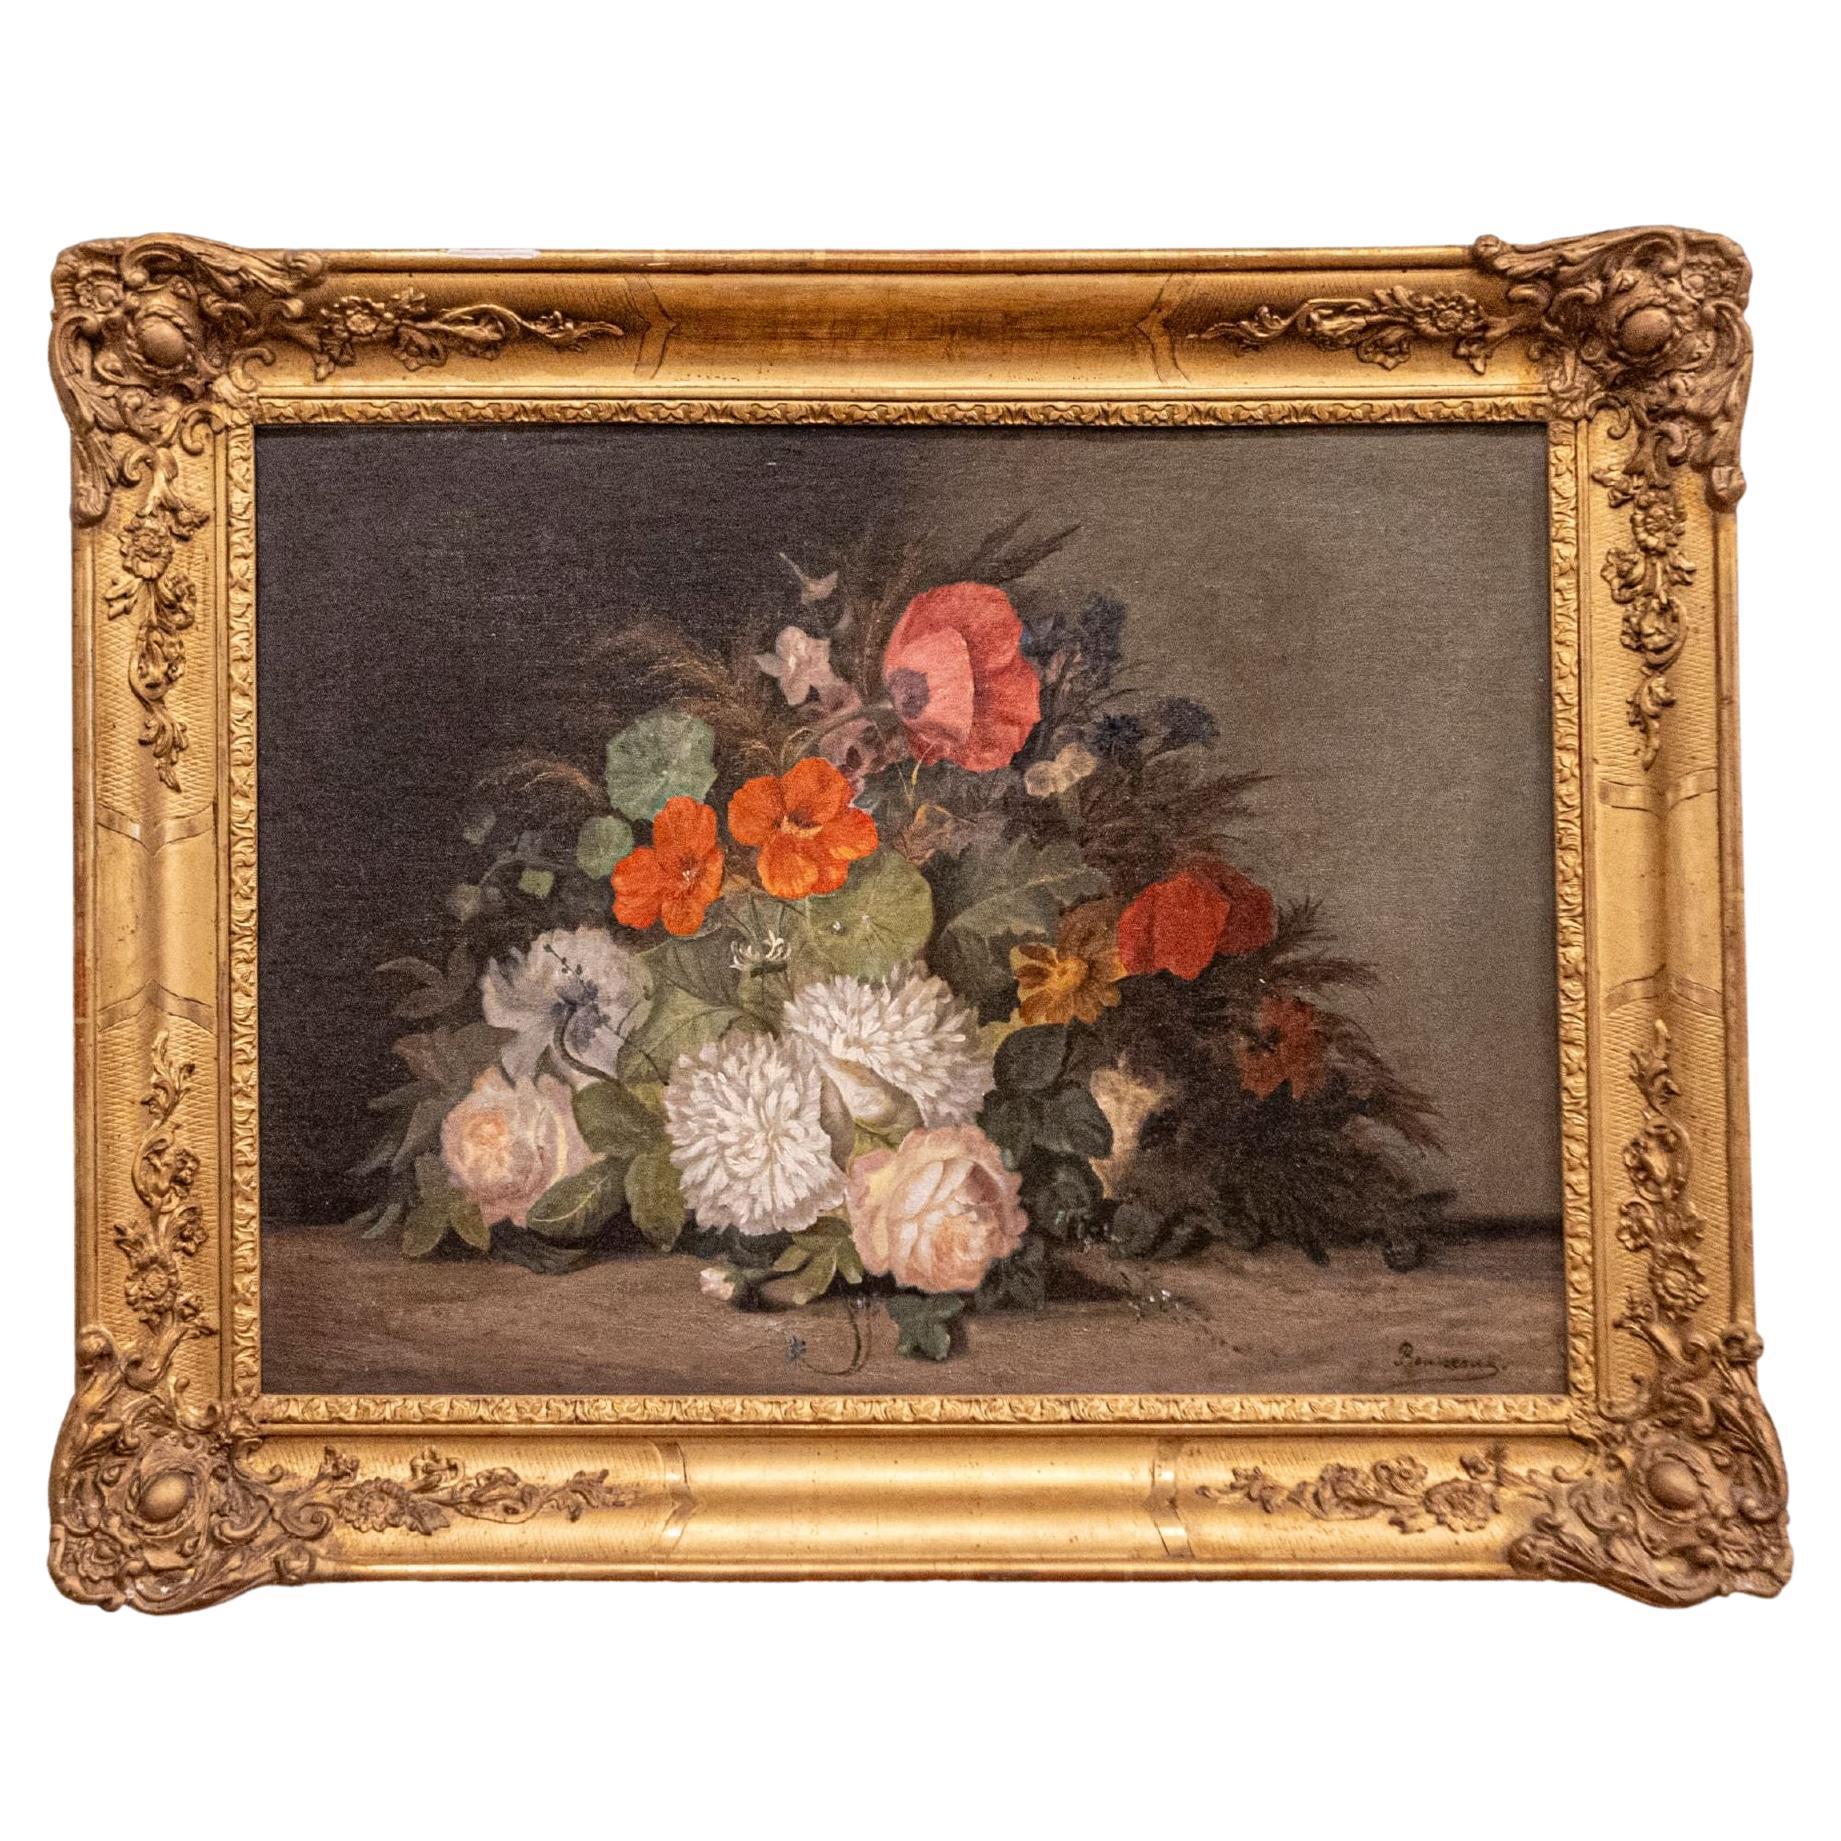 19th Century French Floral Painting Signed Philippe Rousseau in Giltwood Frame